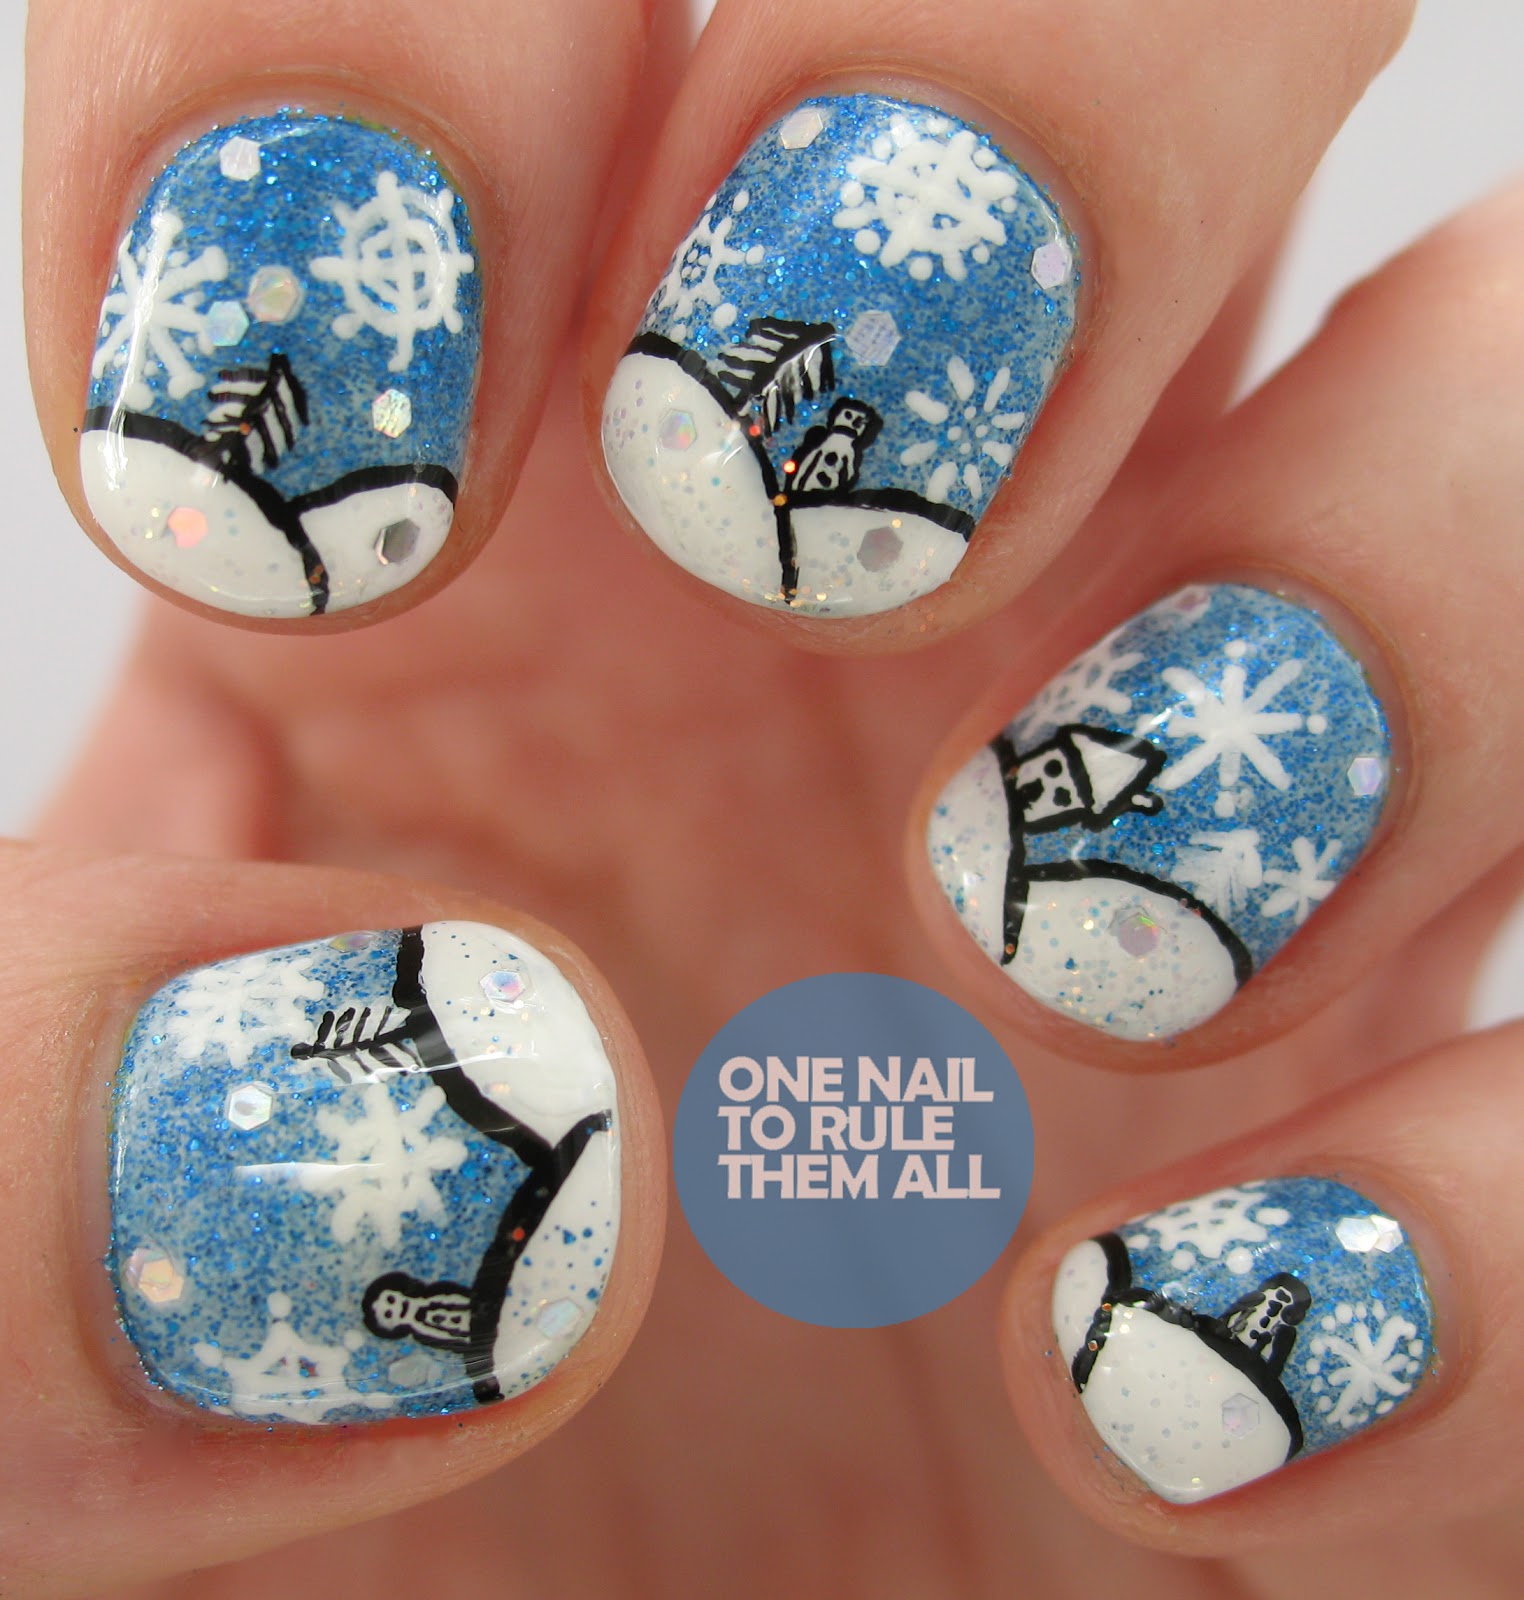 One Nail To Rule Them All Snow scene nails!